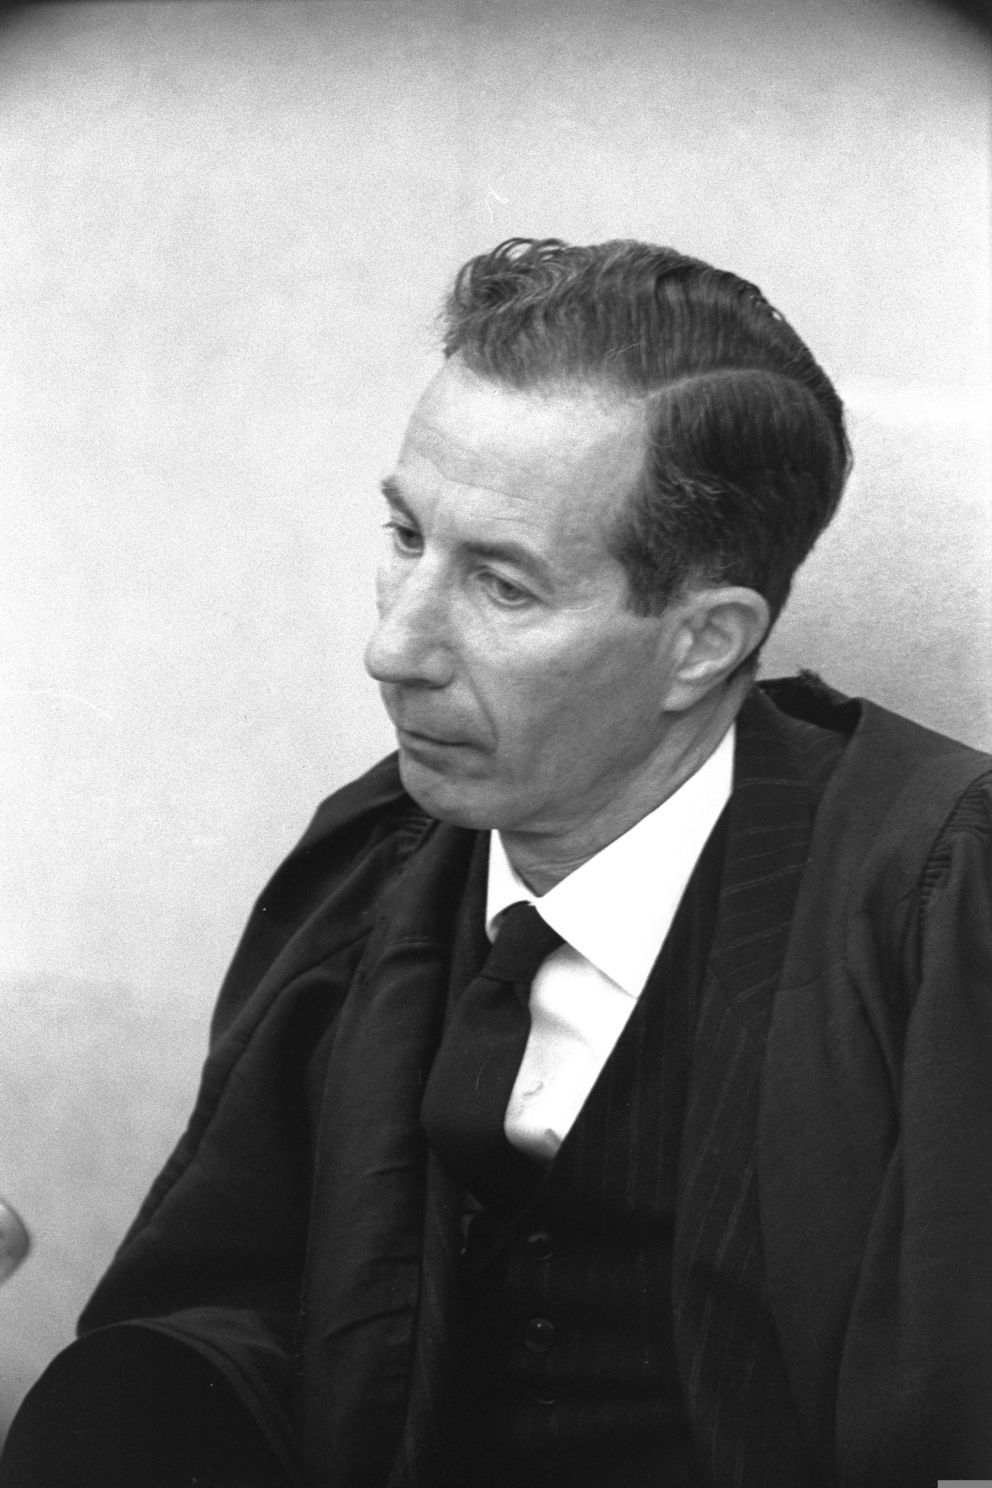 Supreme Court Justice Alfred Witkon